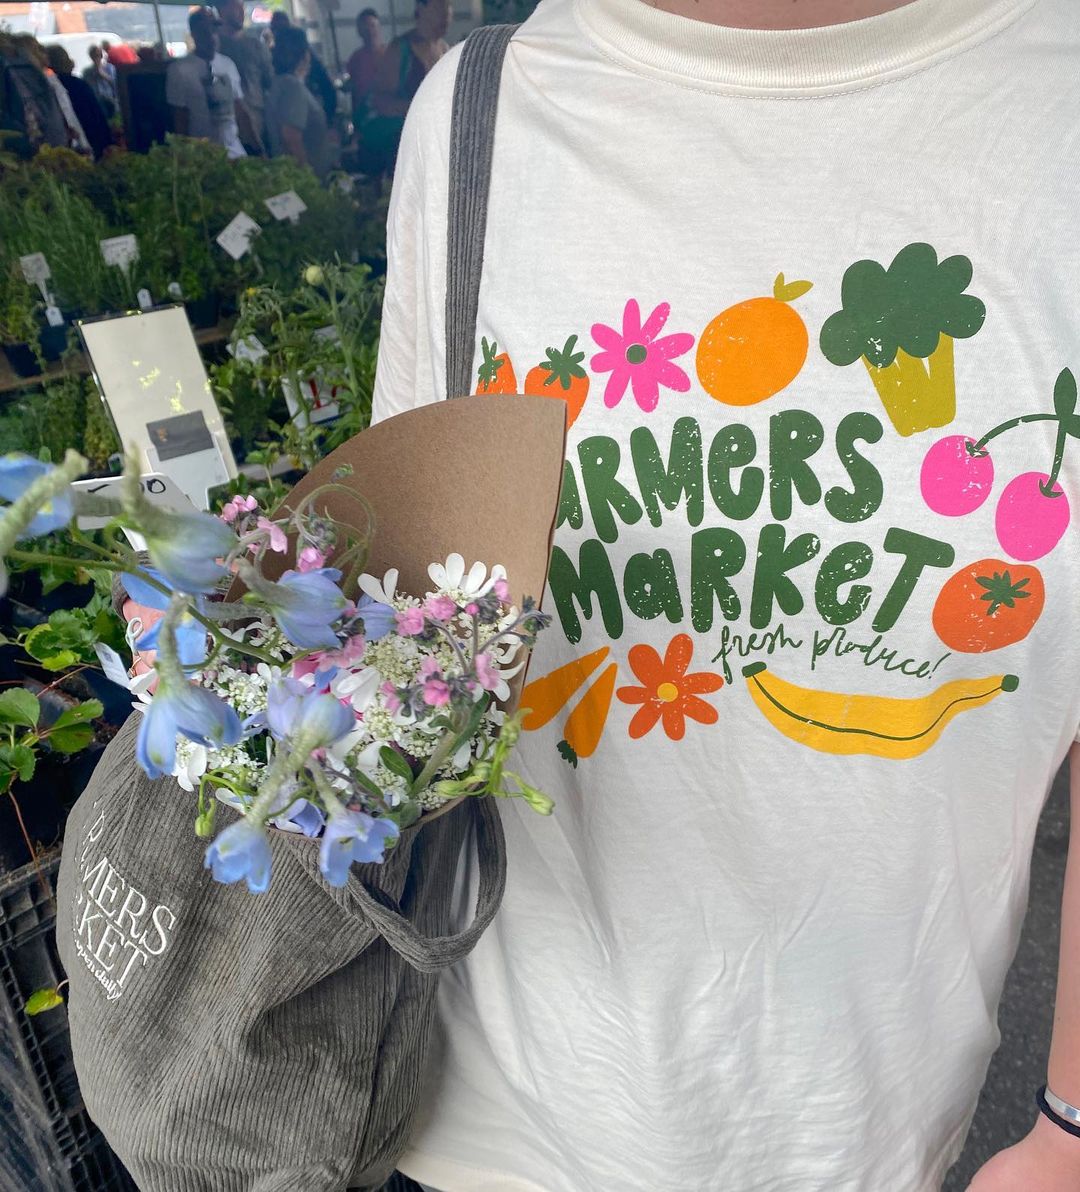 Farmers Market printed on a white t-shirt from presshall.com and embroidered on a corduroy grey tote.